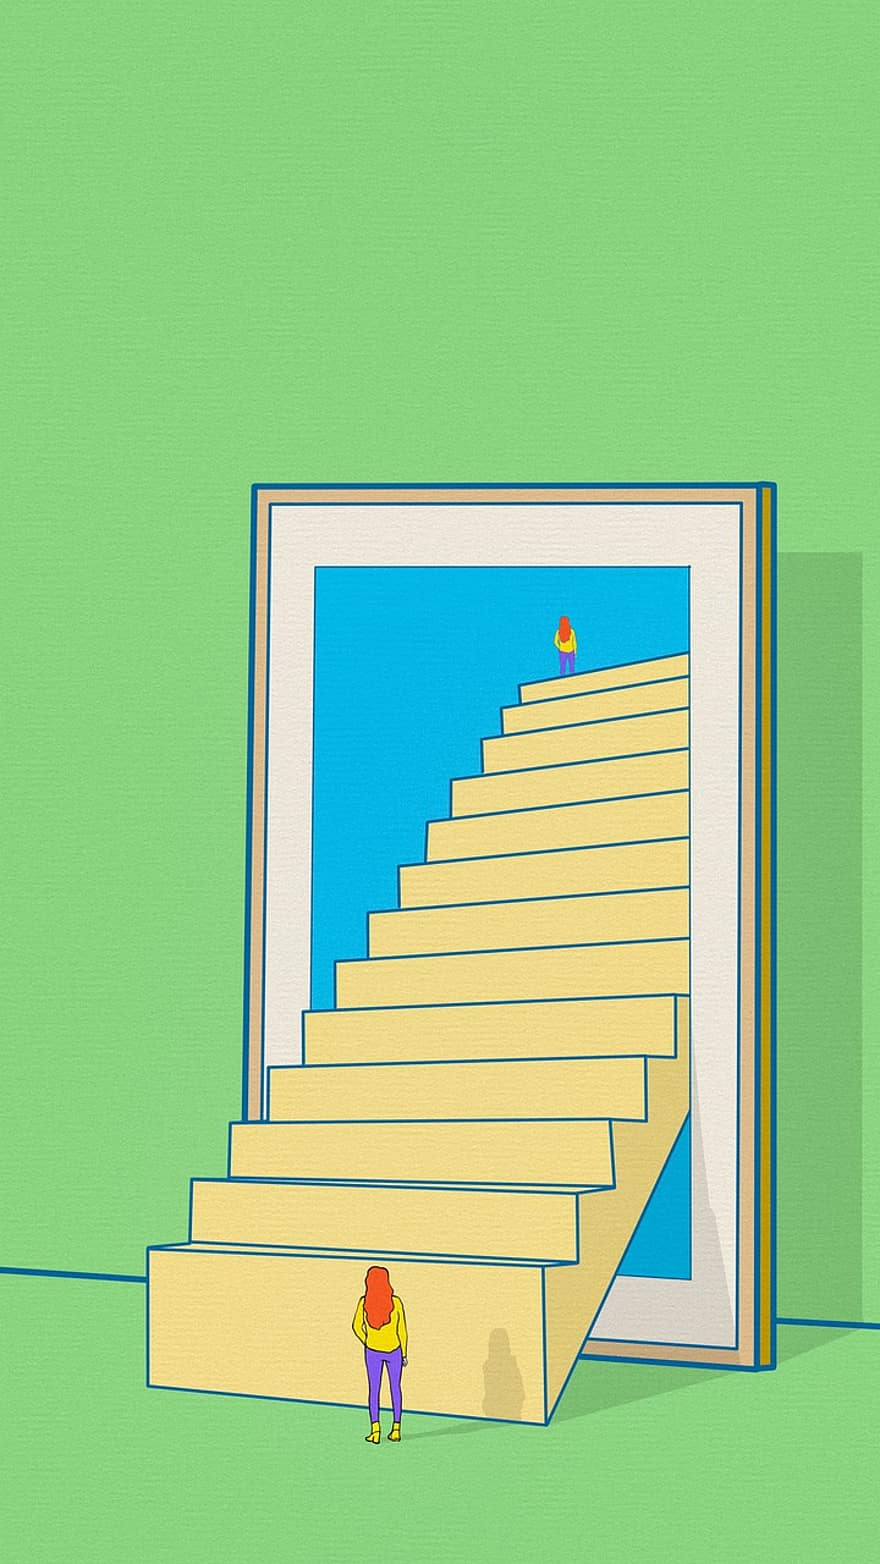 Painting, Frame, Women, Stairs, Up, Green Frame, Green Painting